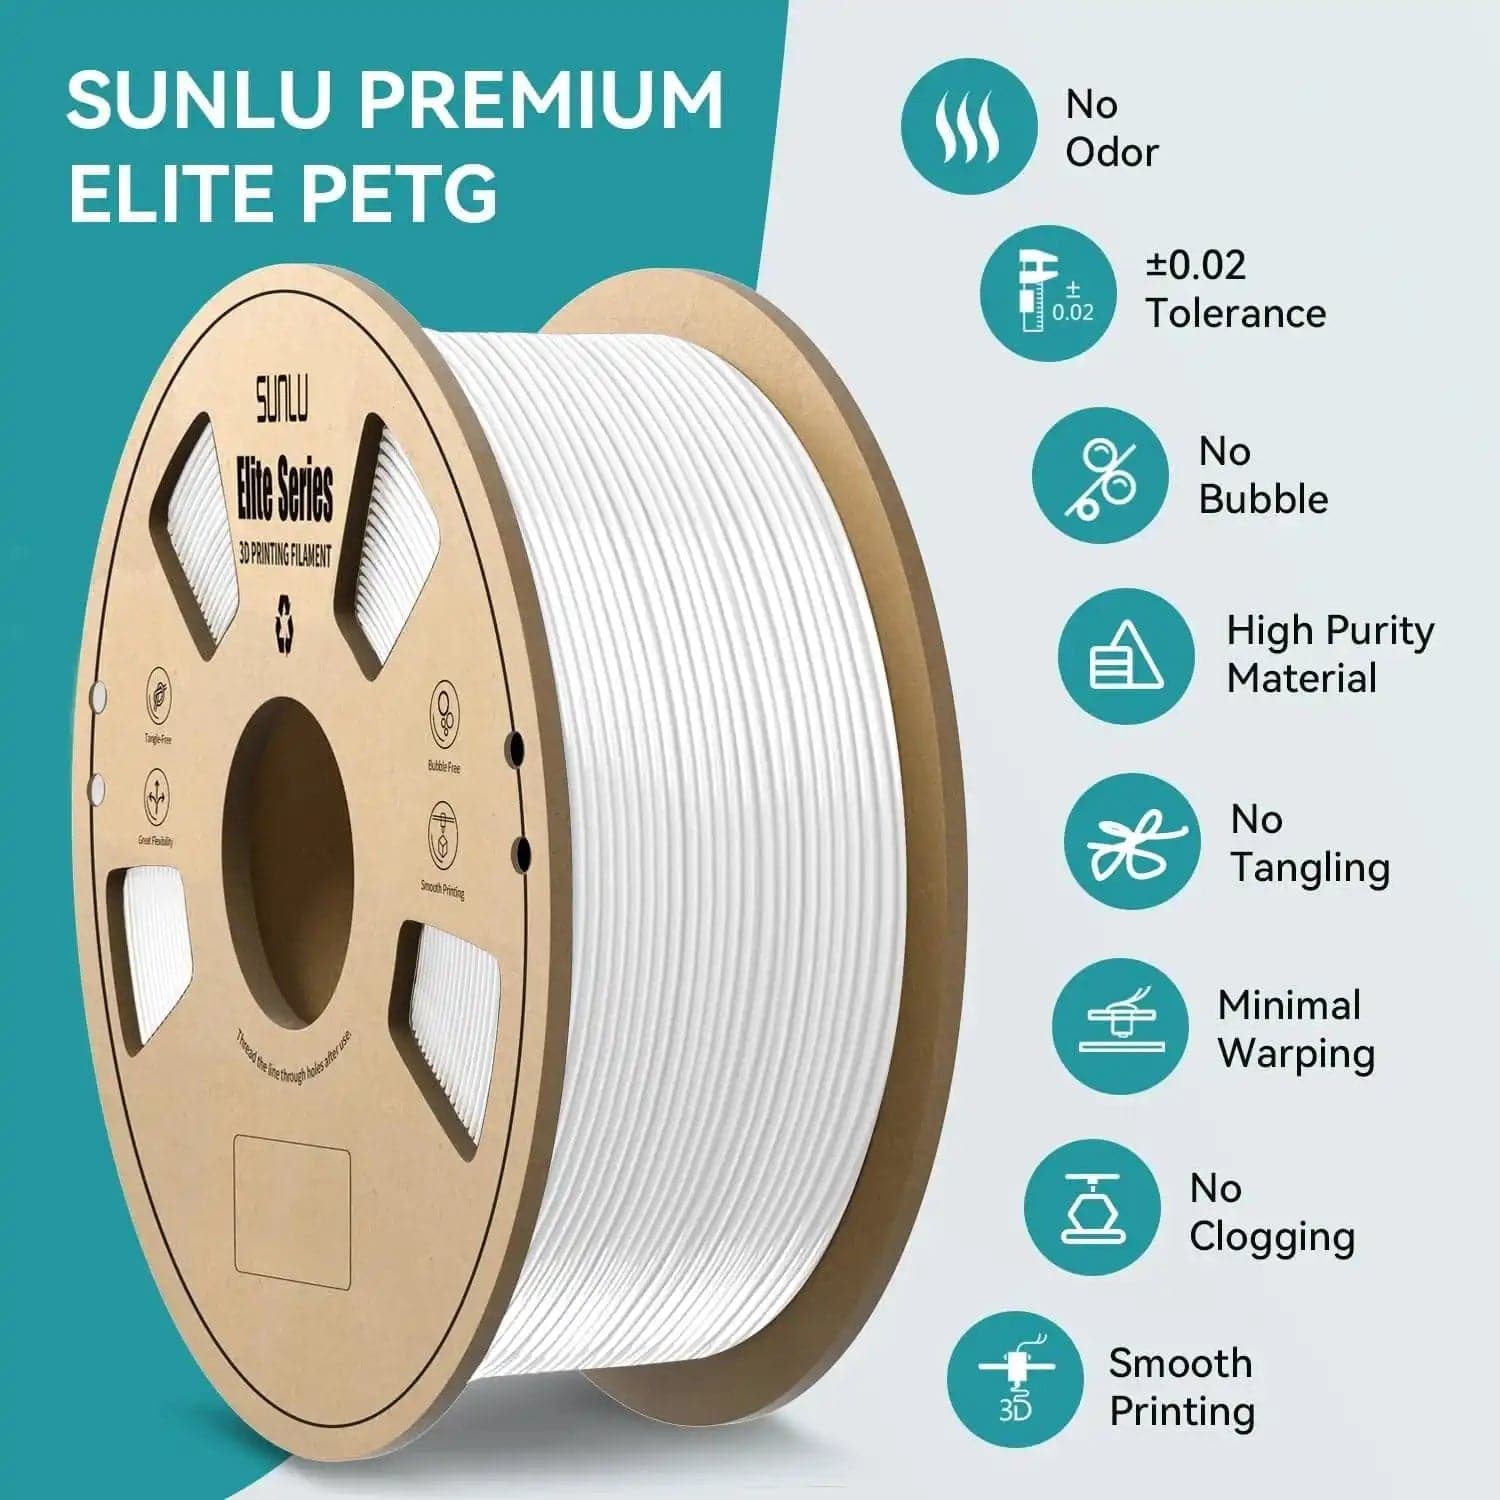 SUNLU Elite PETG Filament 1.75mm 1KGFeatures:


✅【Ship From Amazon FBA Warehouse】Same shipping service with Amazon. Enjoy reliable performance and fast shipping with the Amazon FBA Warehouse.
✅【High-QuSUNLU Elite PETG Filament 13D Printing Materials